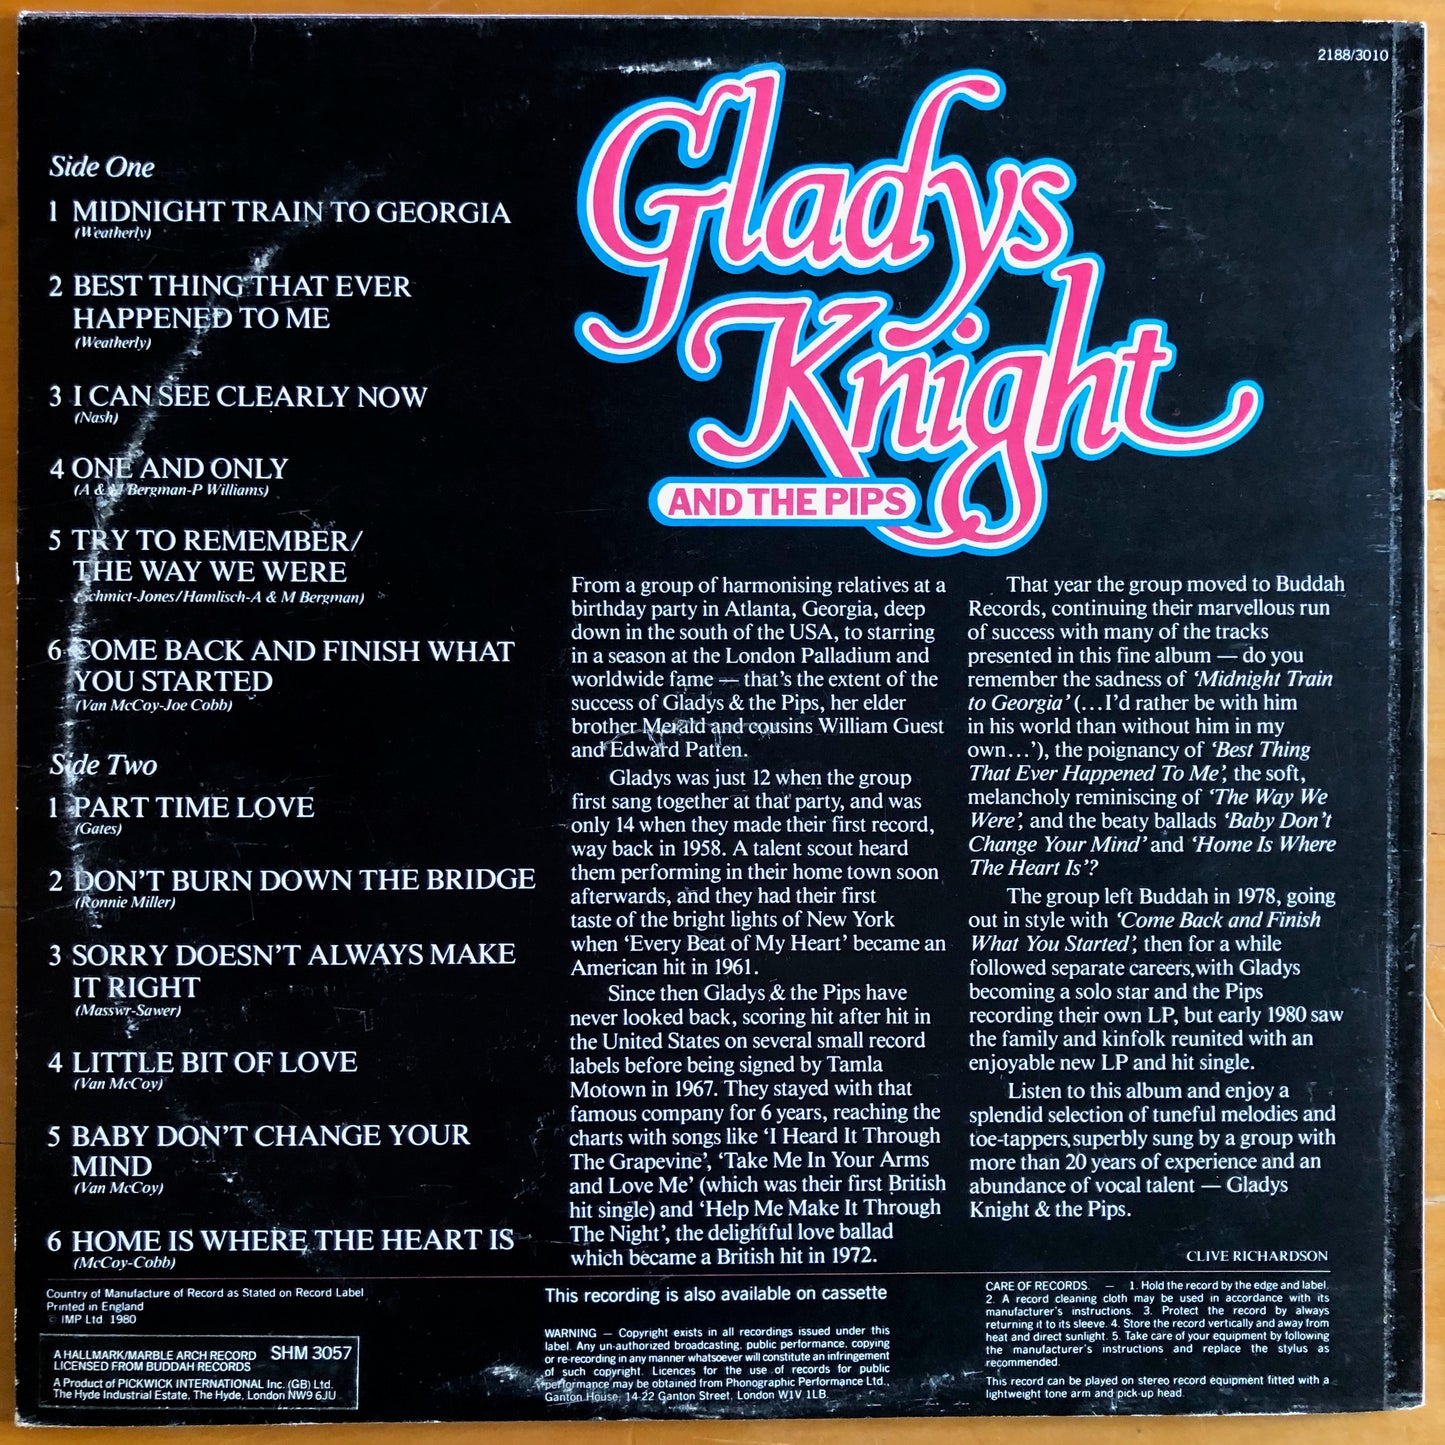 Gladys Knight And The Pips - Midnight Train to Georgia